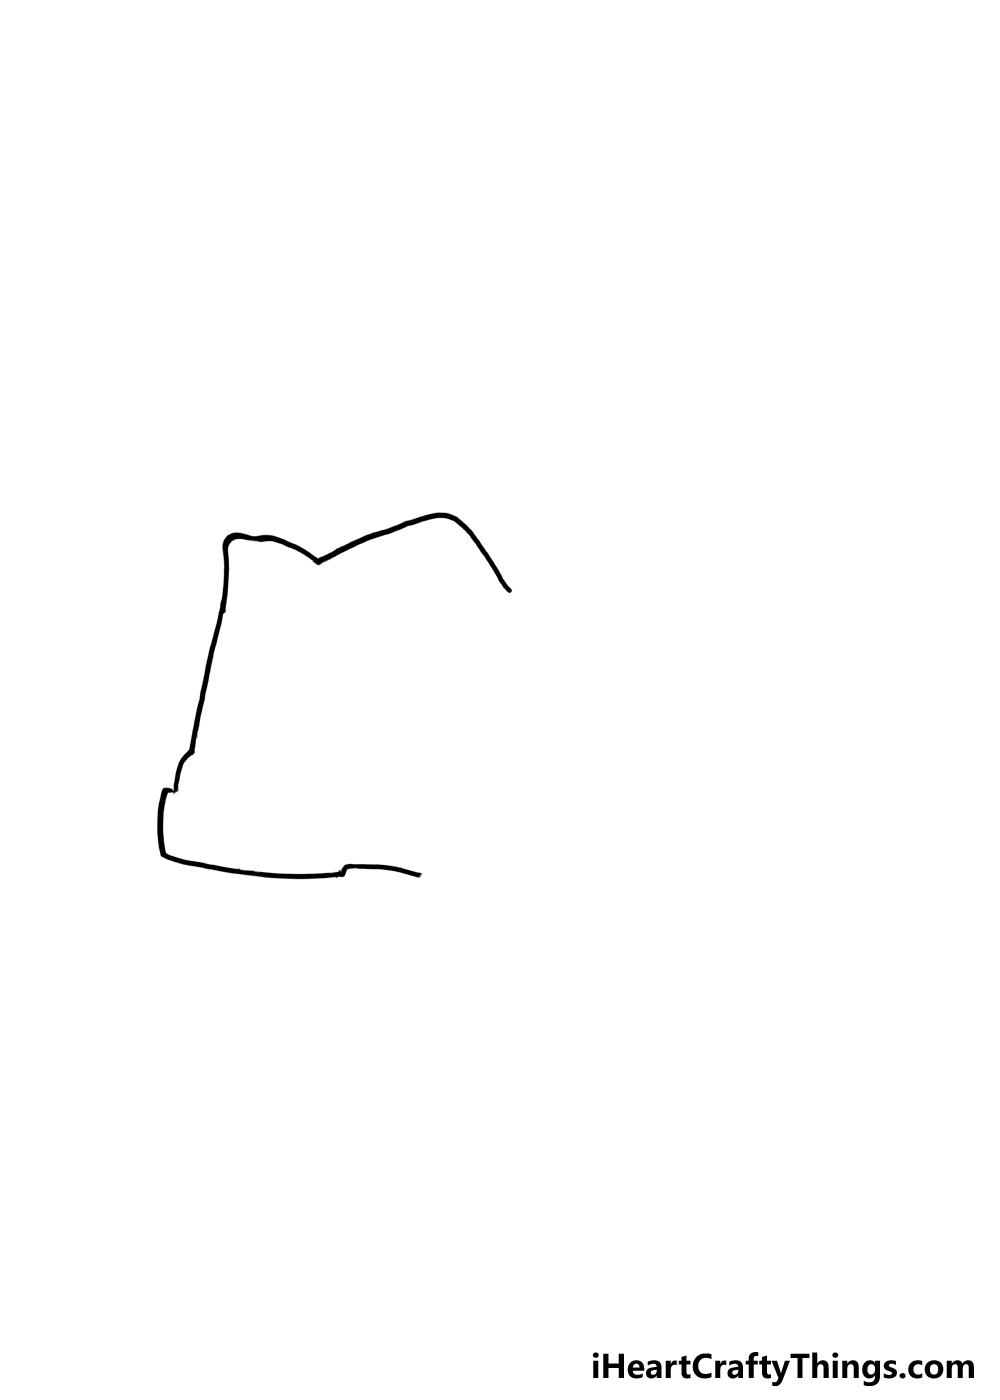 How to Draw A Shoe step 2